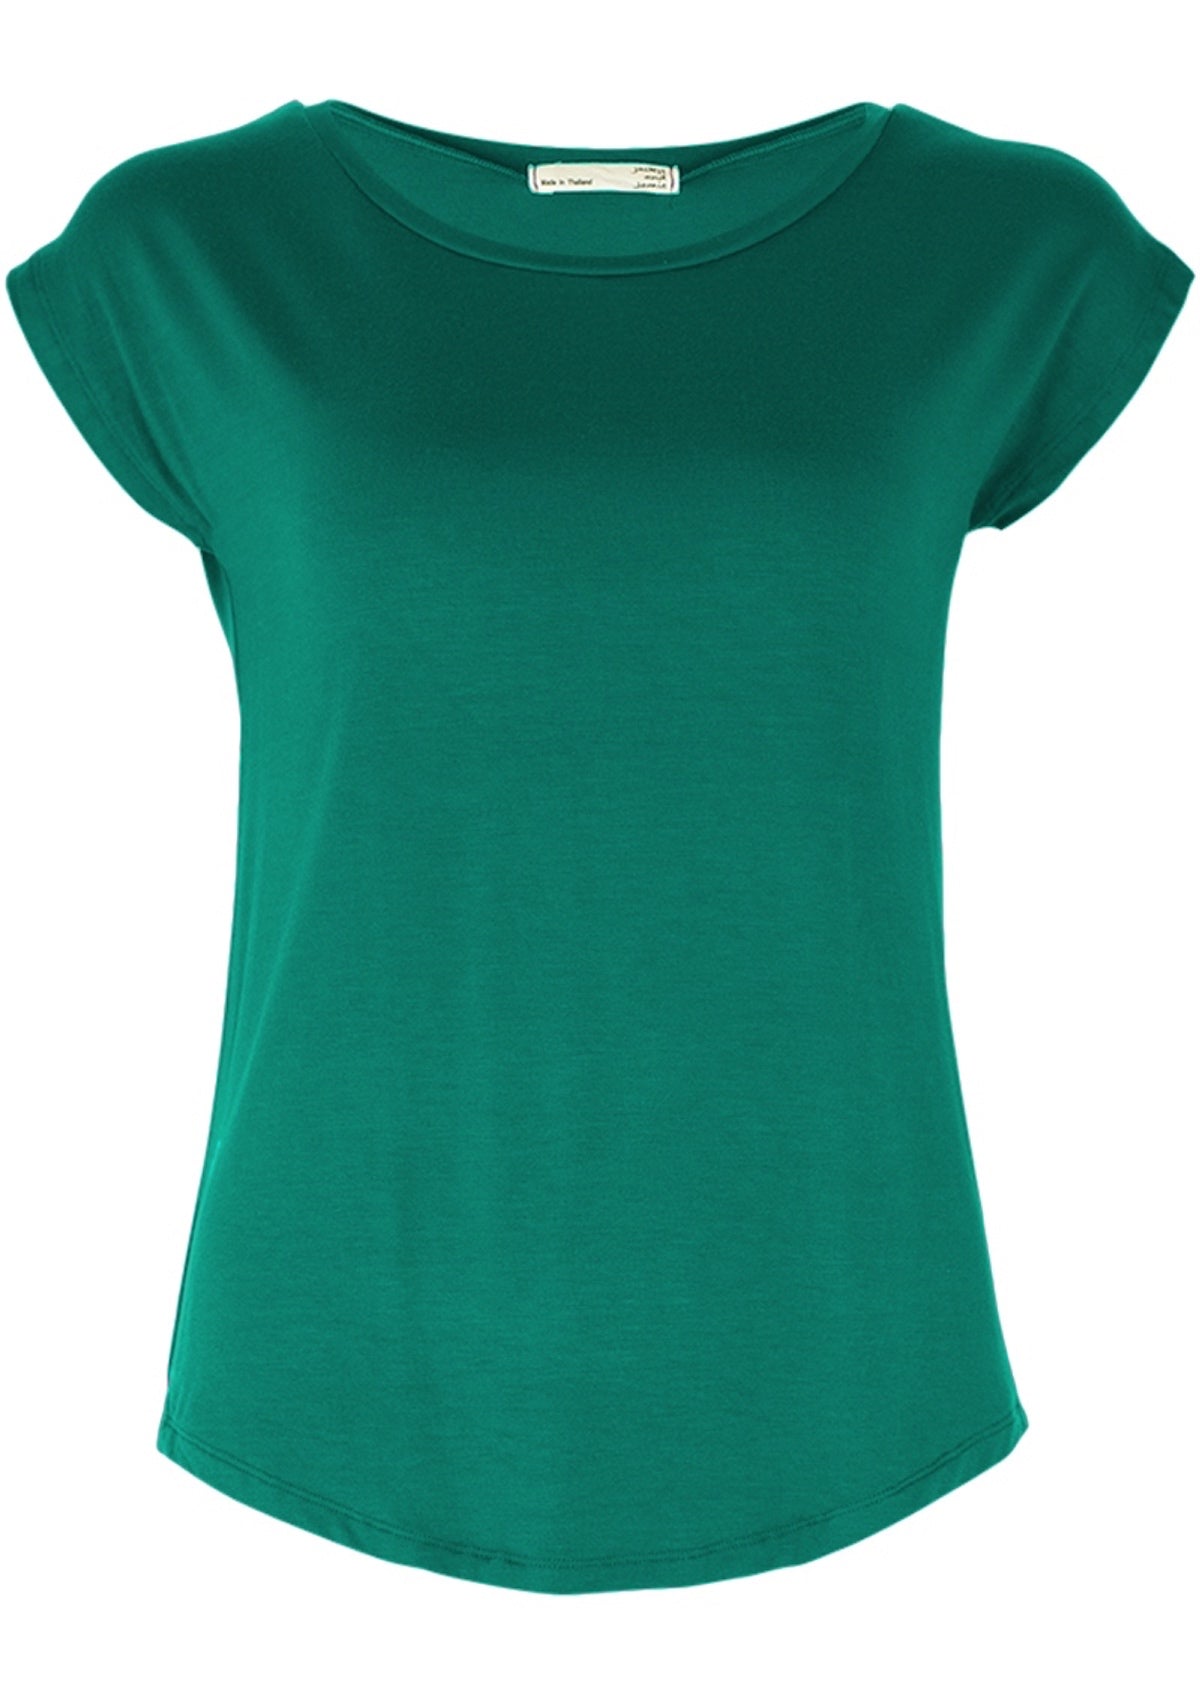 Front view green rayon jersey t-shirt.